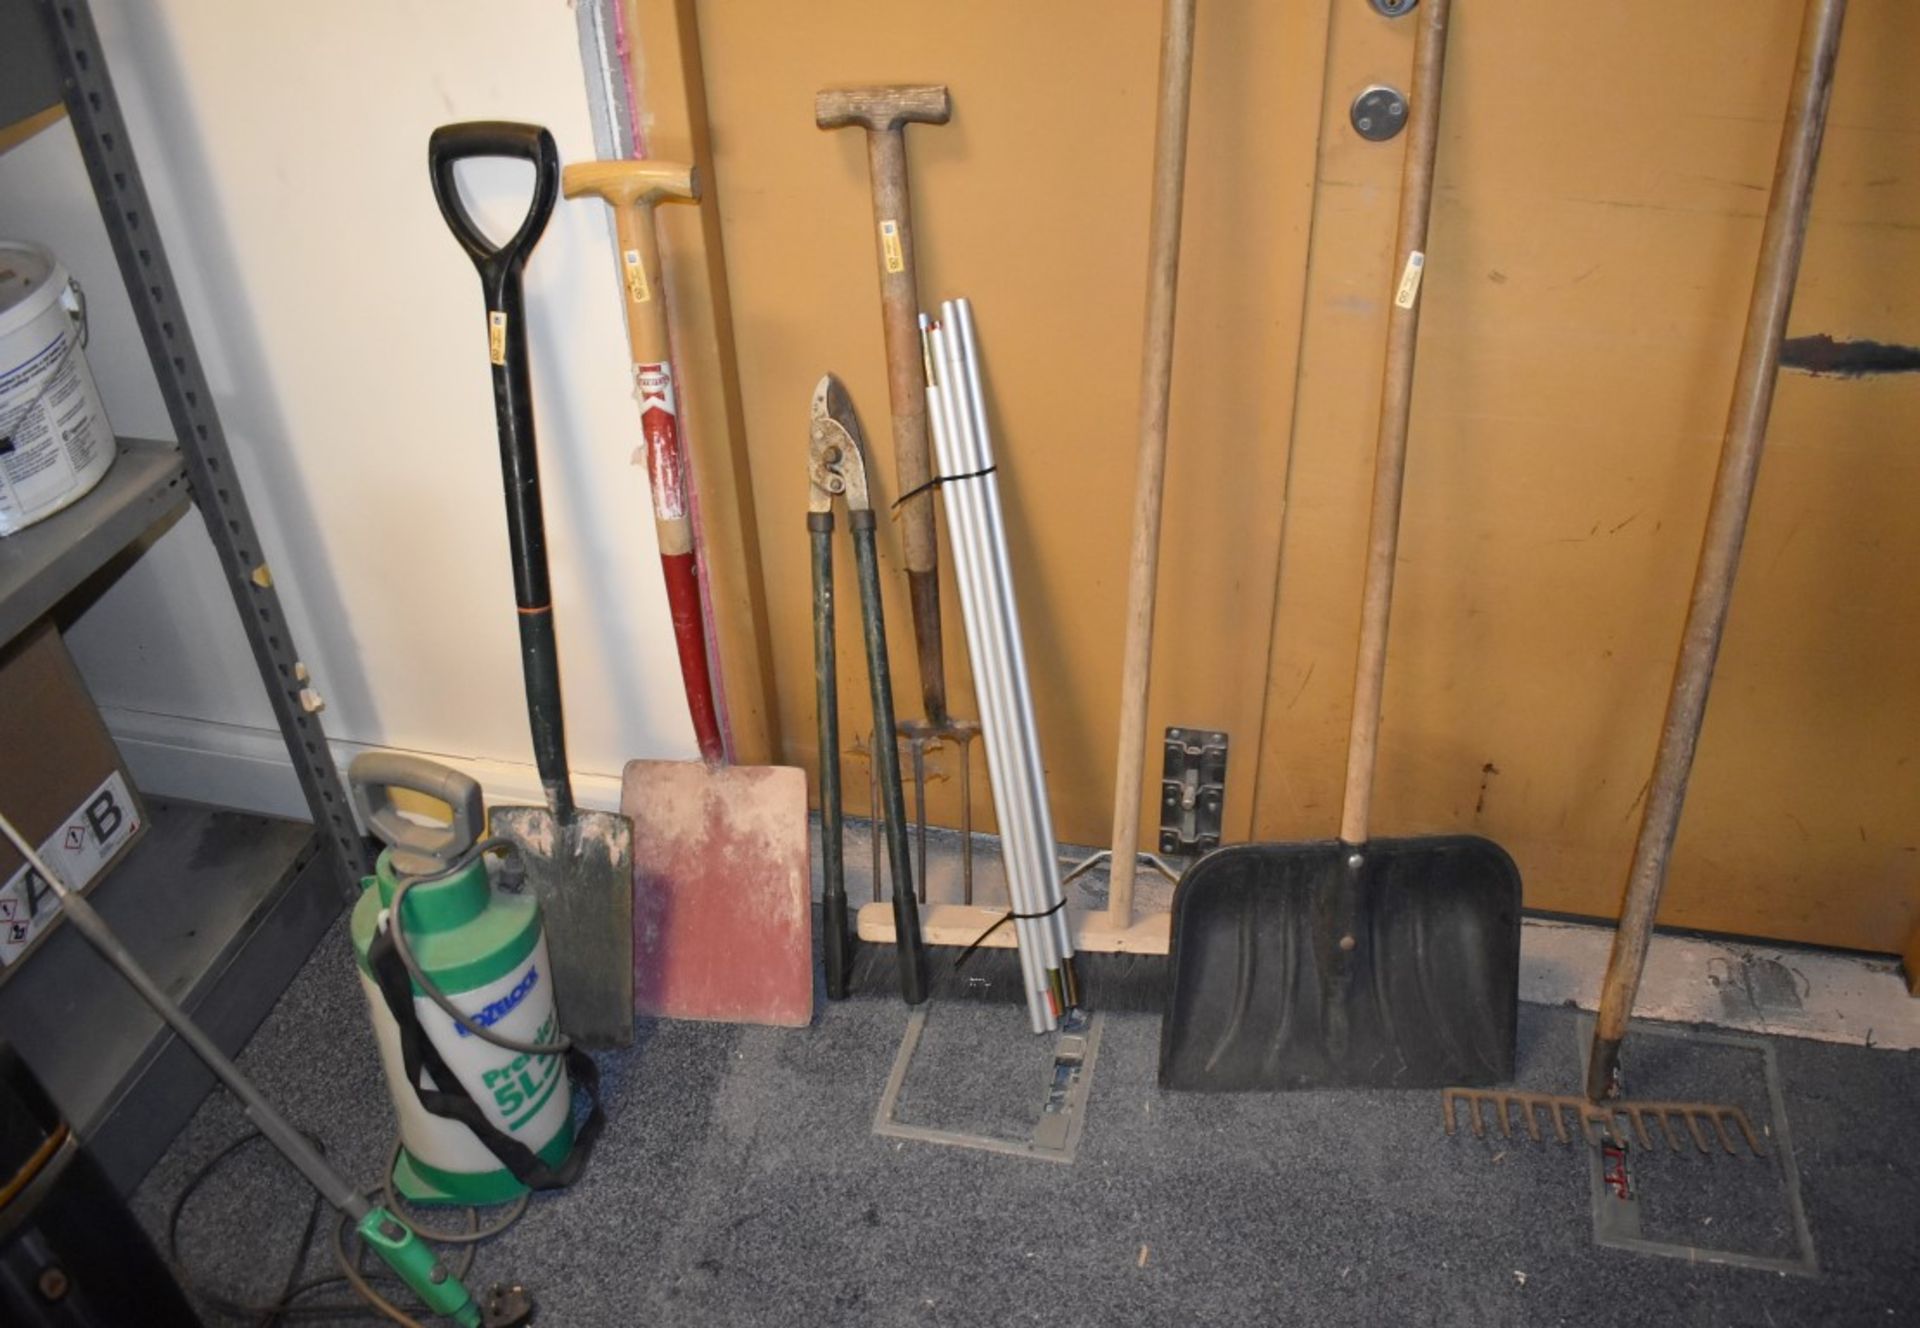 1 x Assorted Collection of Garden Tools - Includes 9 Items Including Shuvels, Rake, Pitch Fork - Image 5 of 5